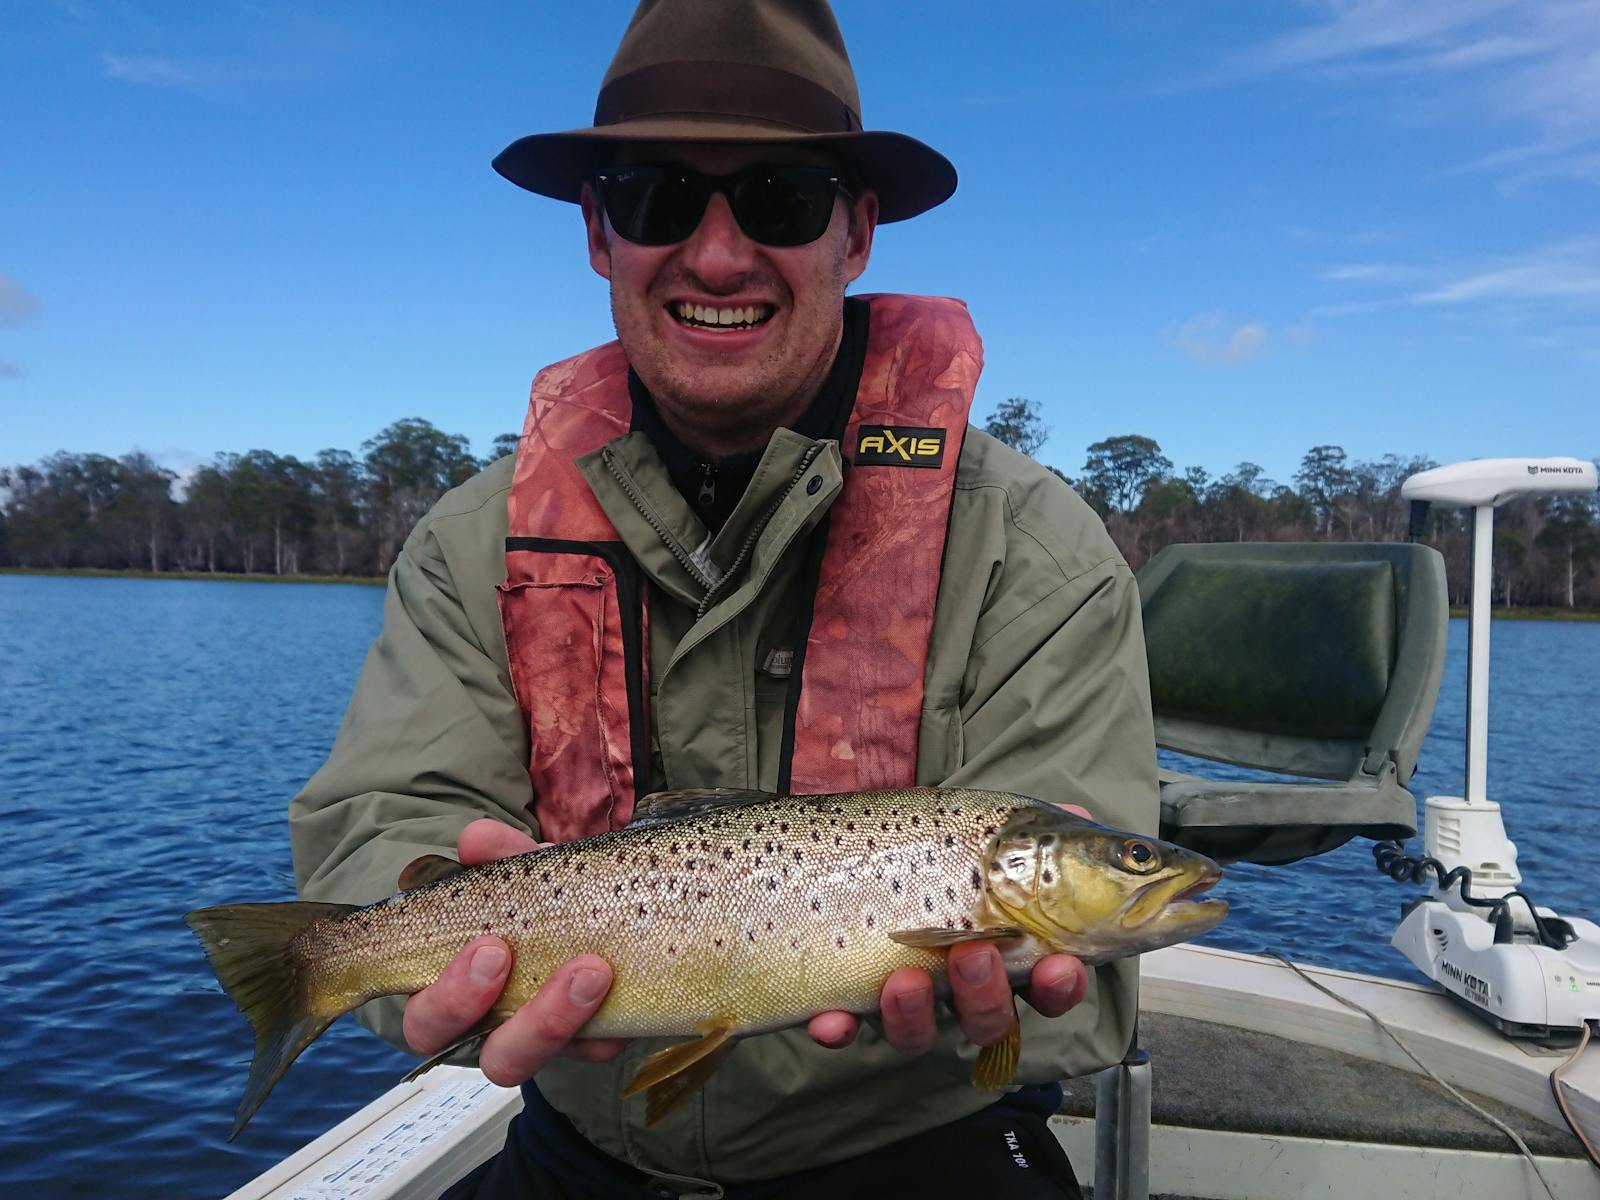 Lex with a wild trout caught on a lake in Tasmania's Central Highlands